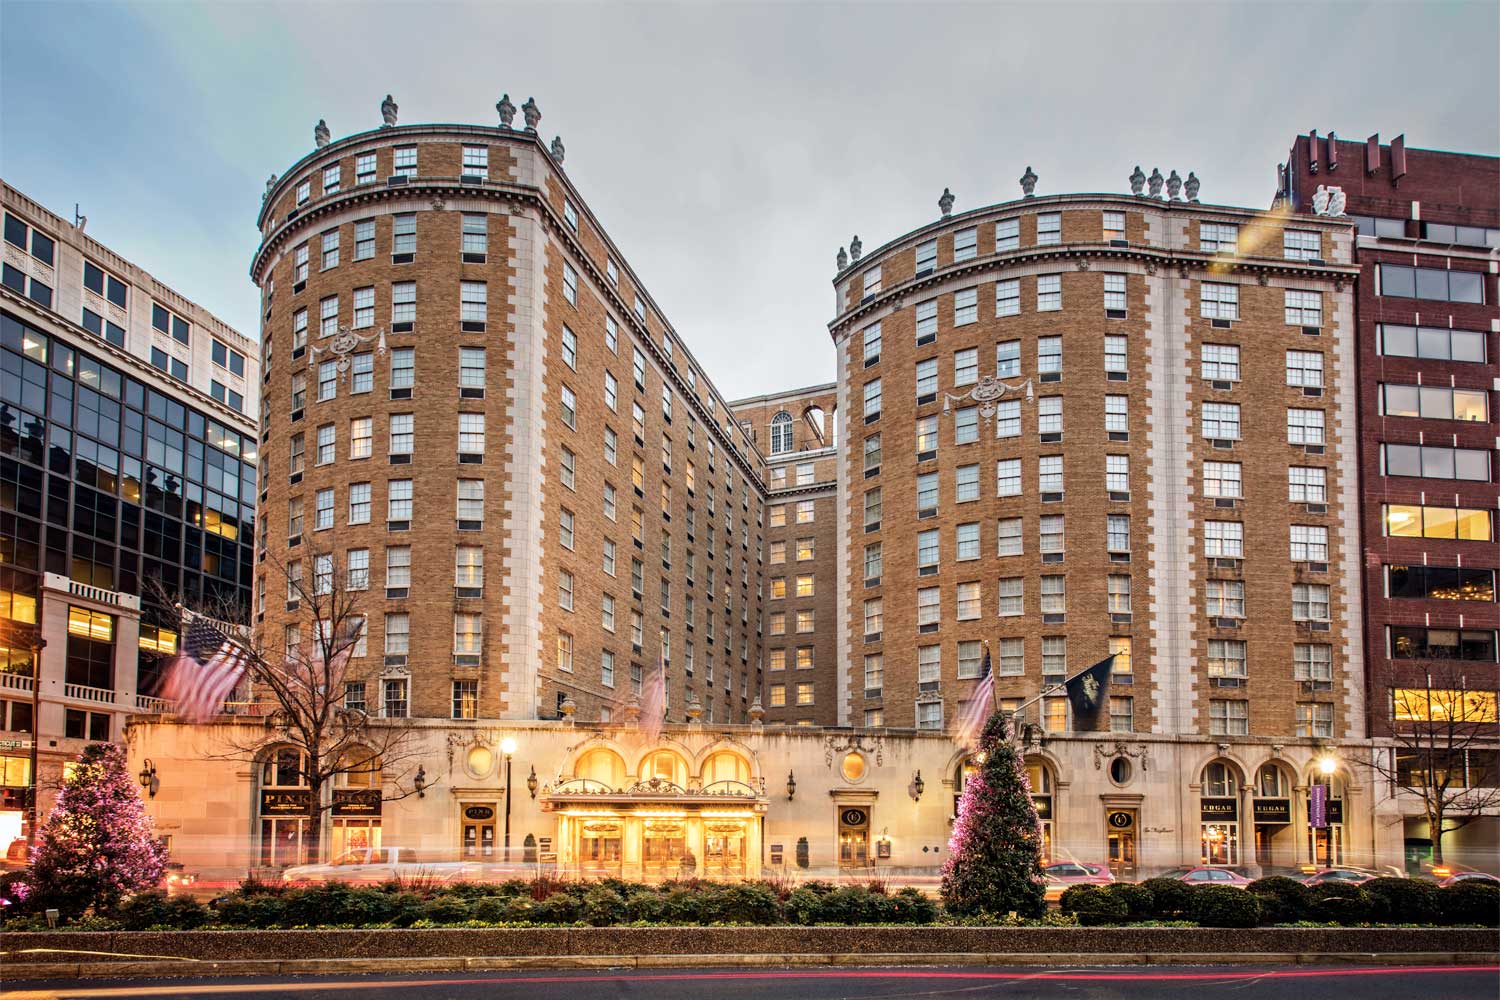 Washington Mayfair Hotel - Guest Reservations